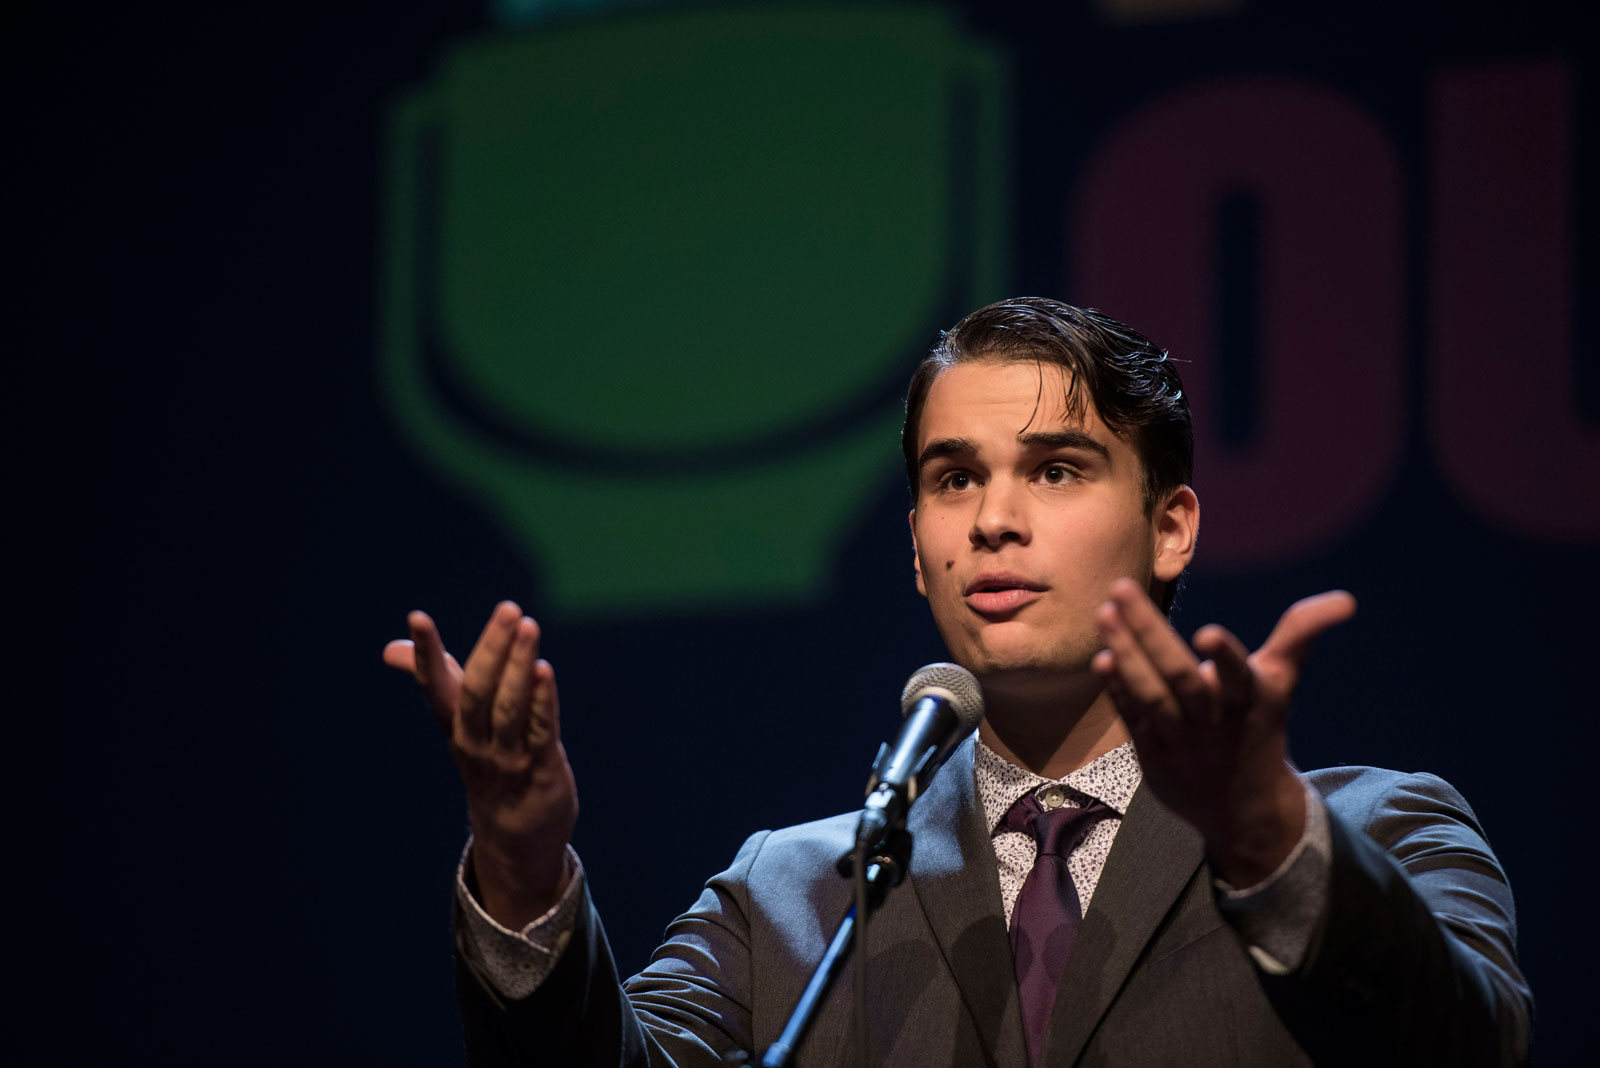 Third place winner: Nicholas Amador of Honolulu, Hawaii during his performance. (National Endowment for the Arts/James Kegley)